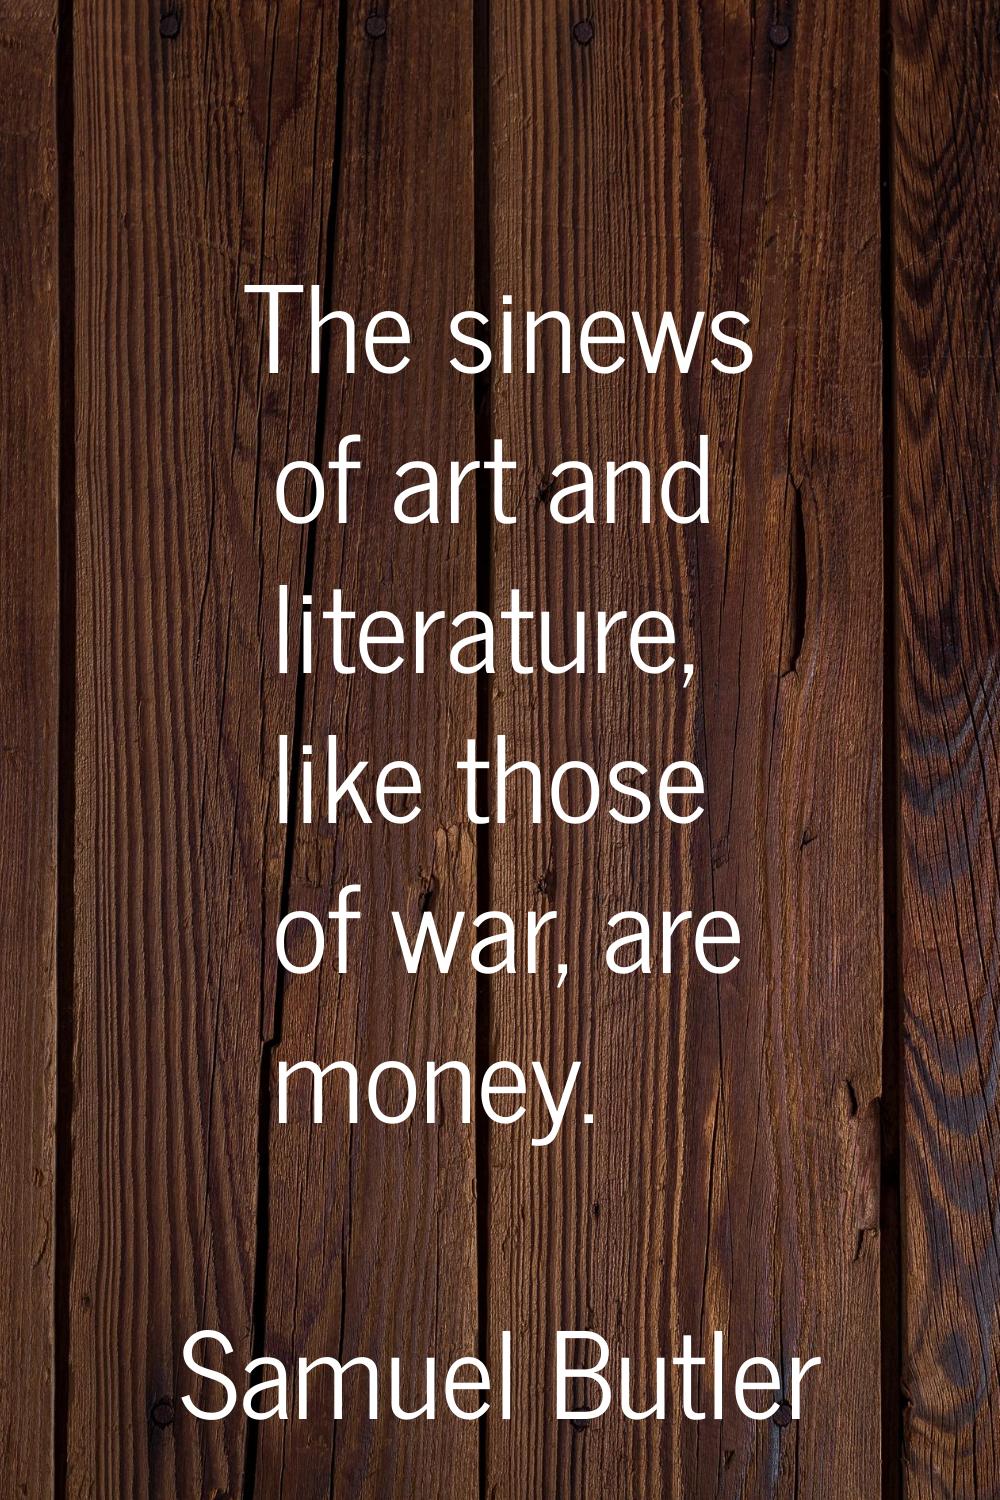 The sinews of art and literature, like those of war, are money.